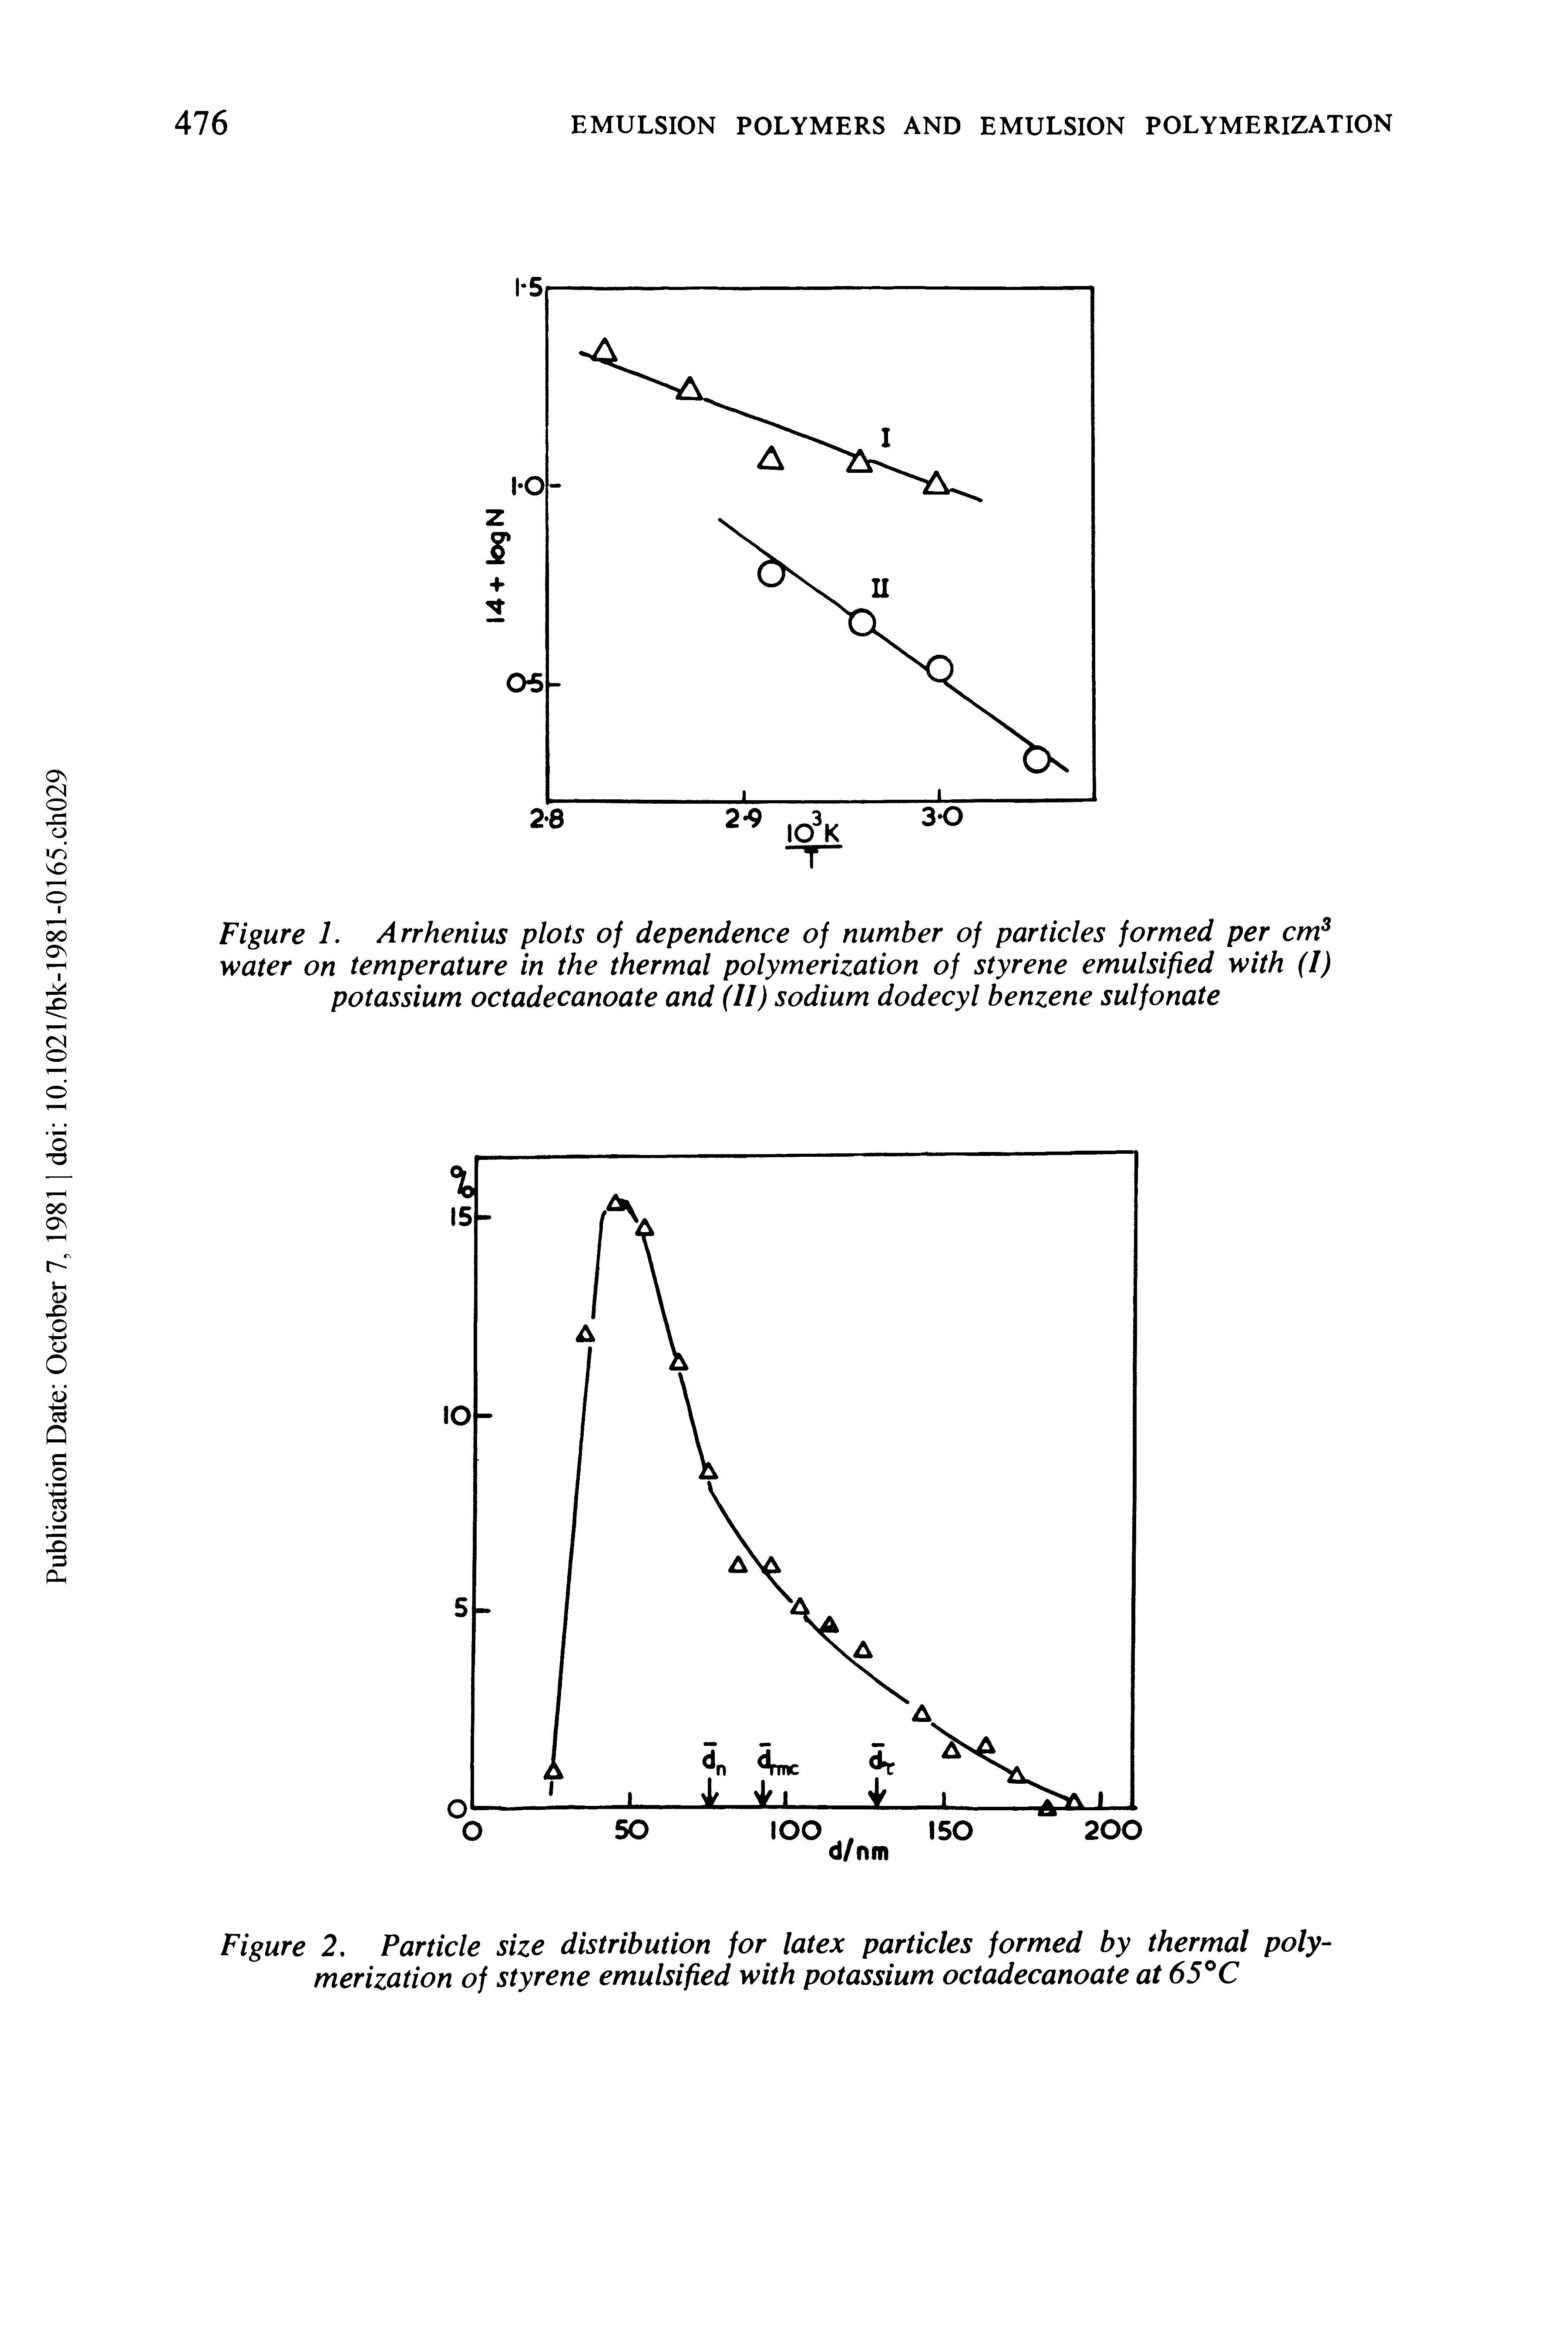 Figure 1. Arrhenius plots of dependence of number of particles formed per cm3 water on temperature in the thermal polymerization of styrene emulsified with (I) potassium octadecanoate and (II) sodium dodecyl benzene sulfonate...